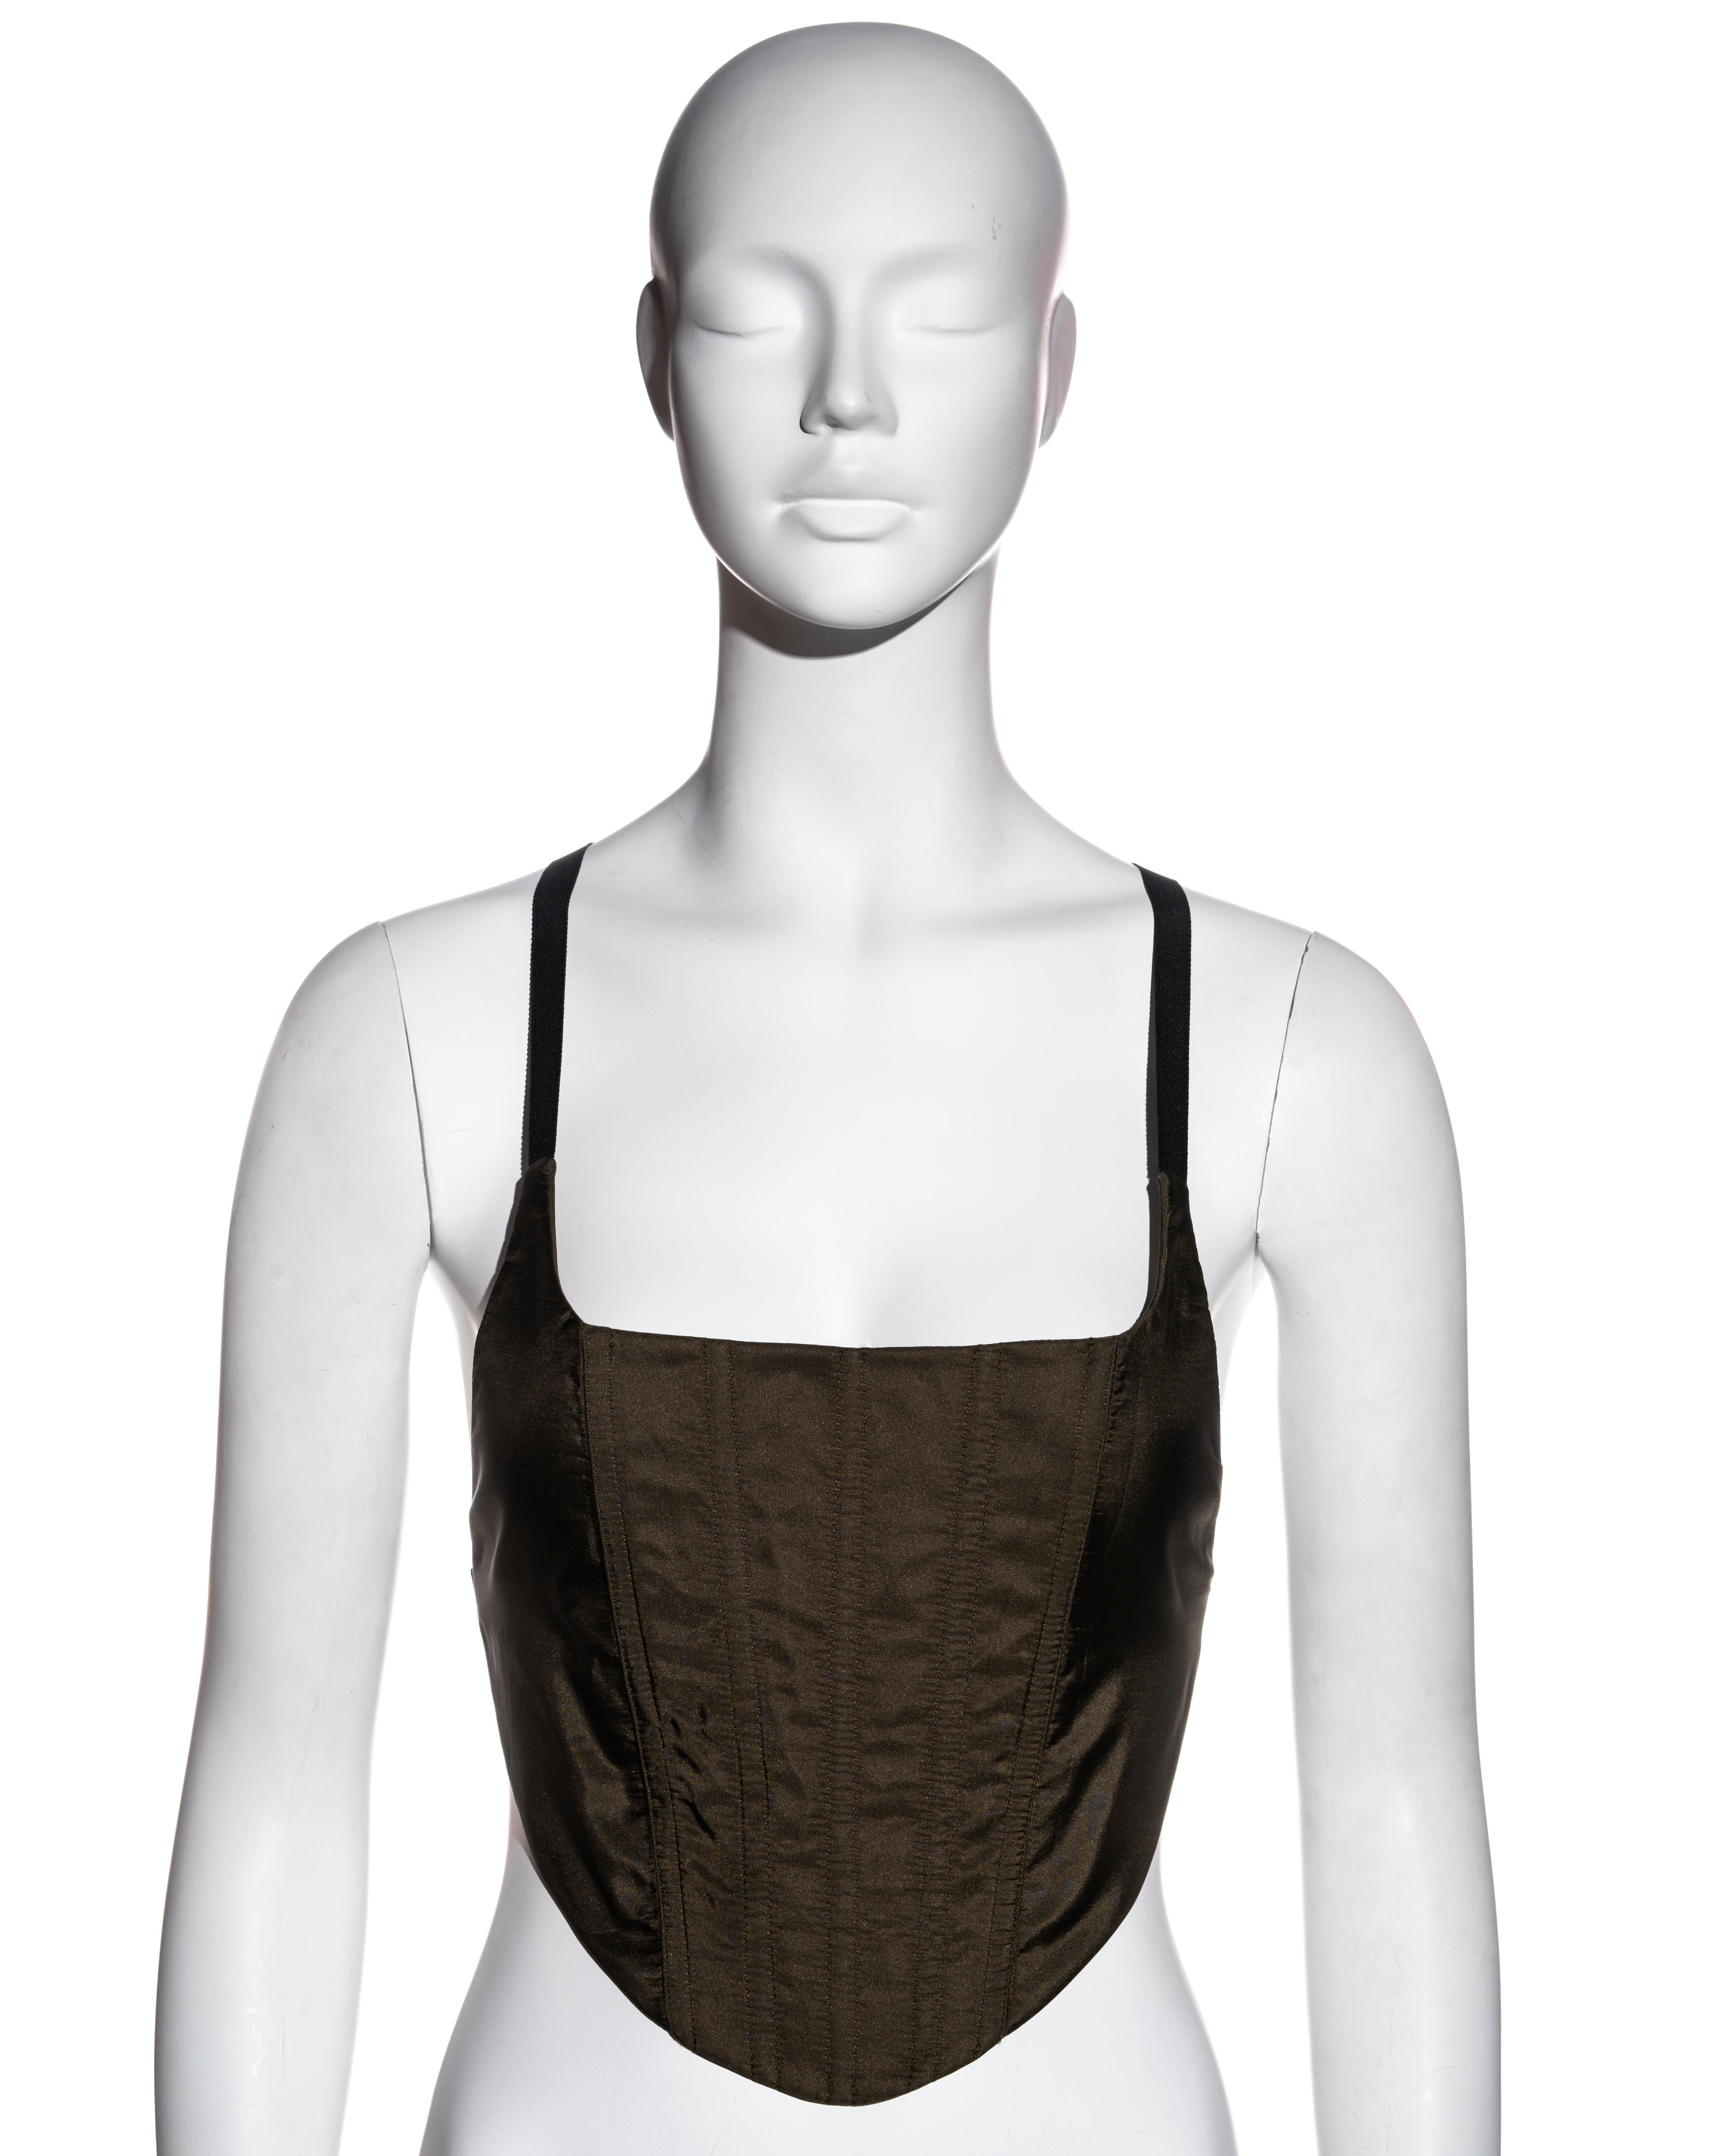 ▪ Prada khaki green silk corset top
▪ Designed by Miuccia Prada
▪ Boned bodice 
▪ Black grosgrain straps 
▪ Logo etched metal buckles at sides 
▪ Adjustable velcro fastenings at back 
▪ IT 40 - FR 36 - UK 8 (sizing is slightly flexible due to velcro